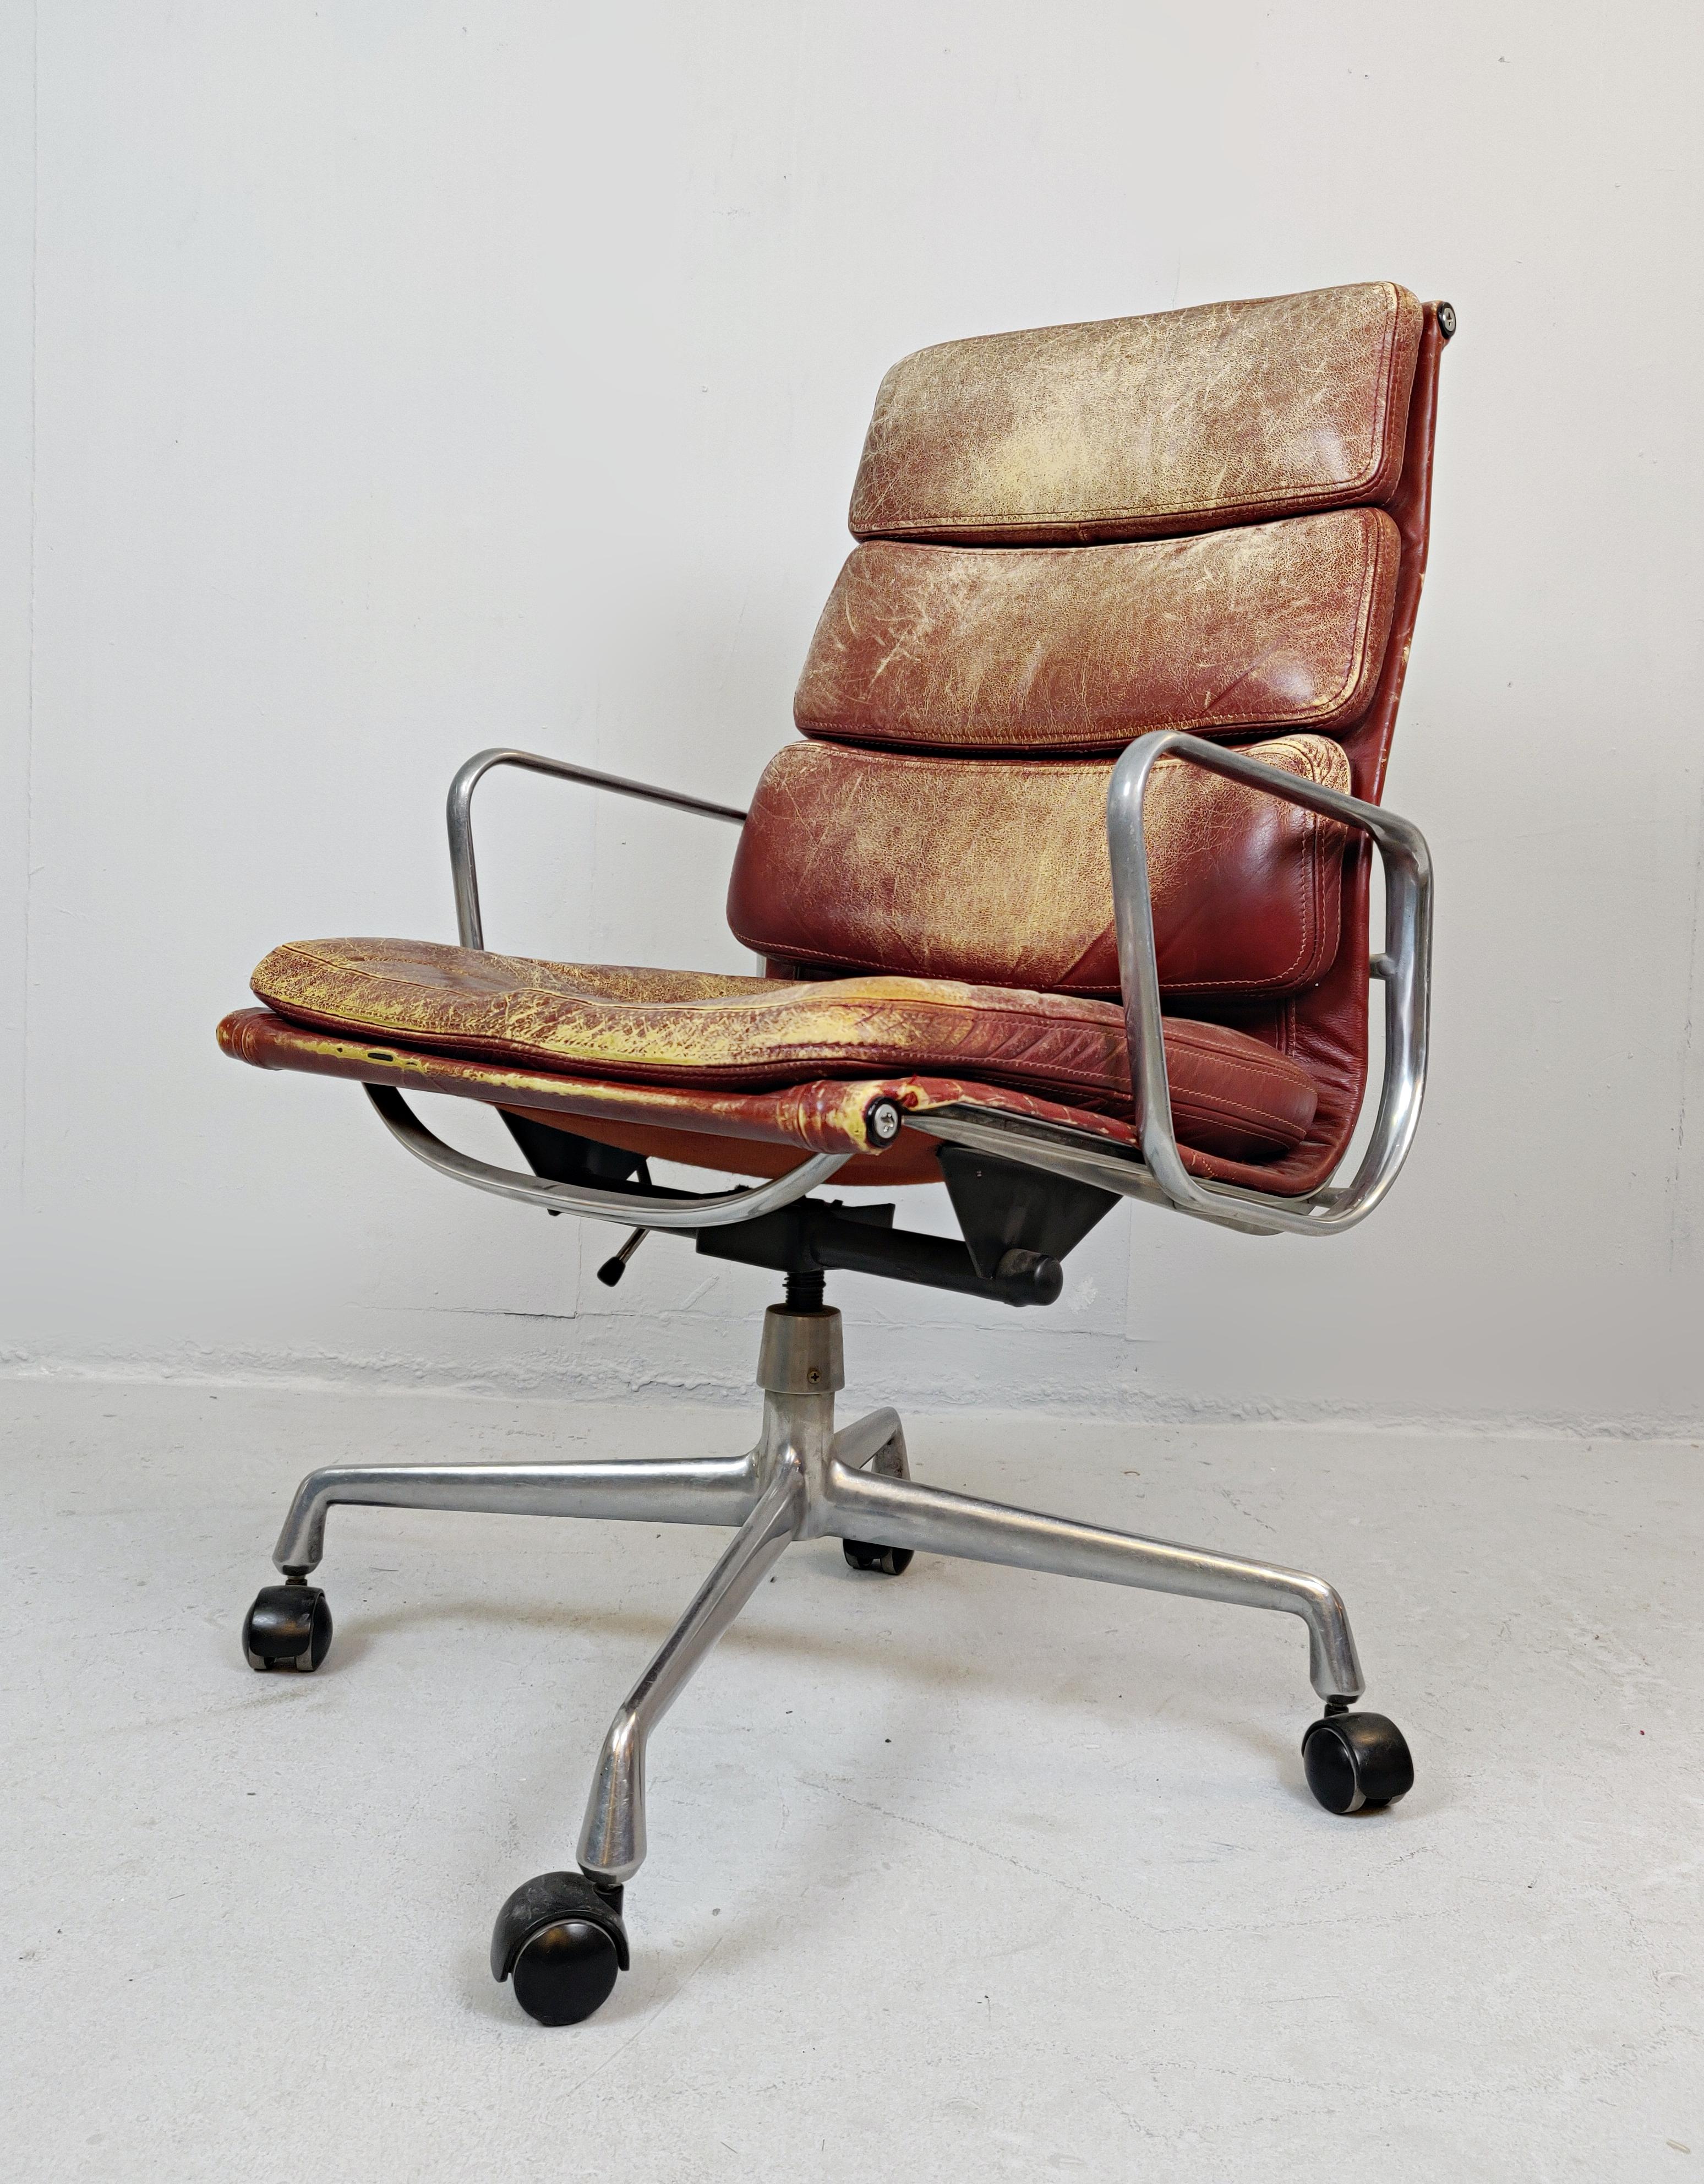 Executive desk chair by Charles Eames for Herman Miller.